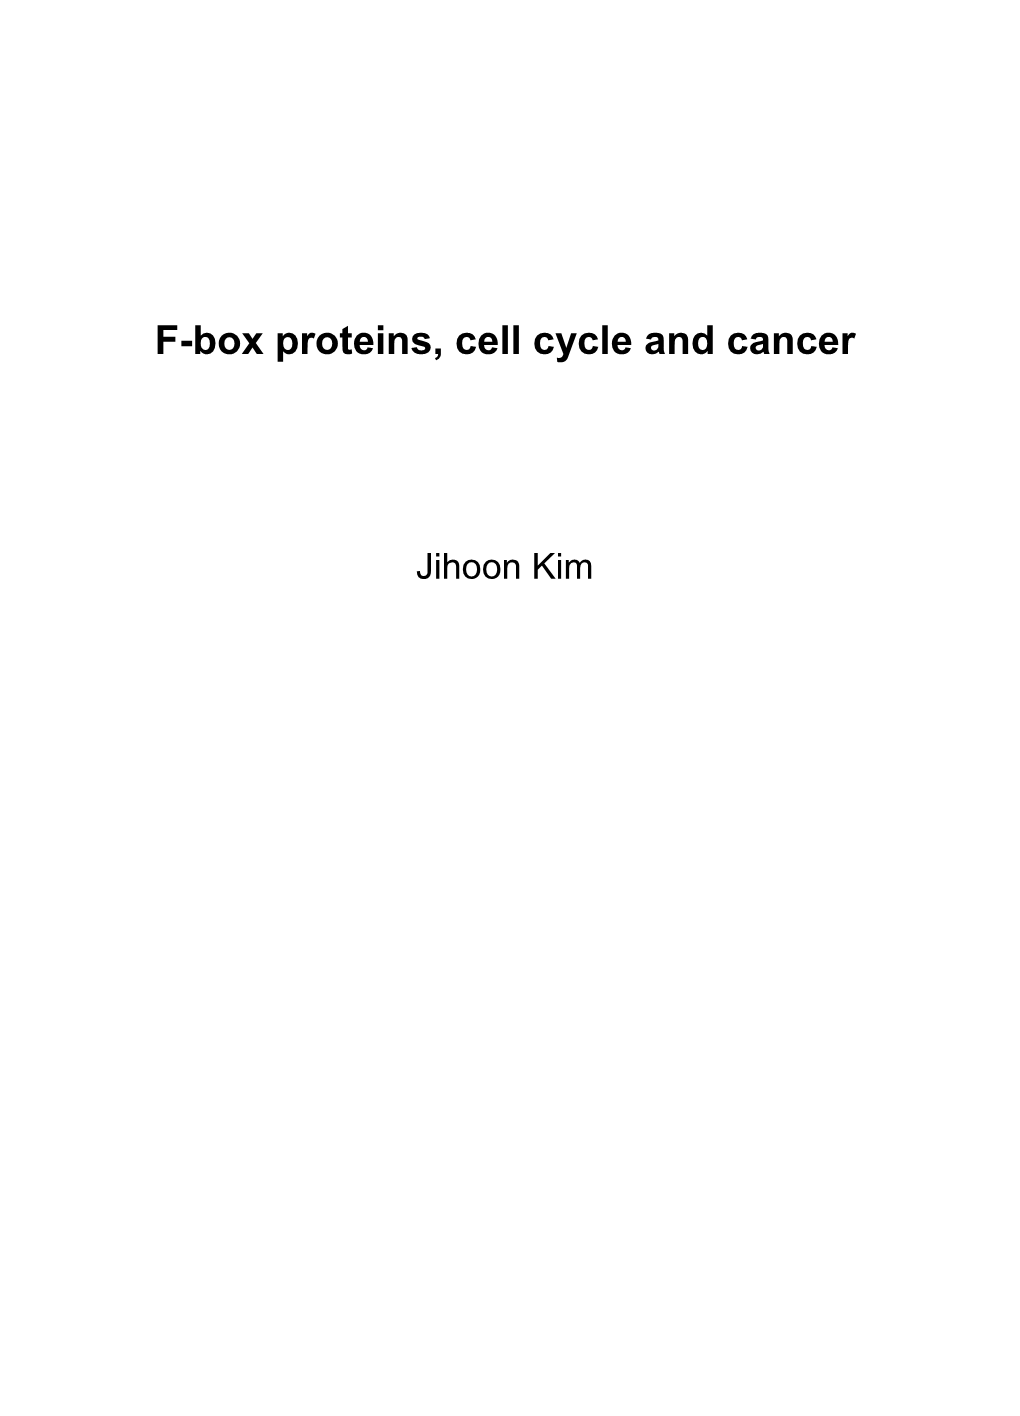 F-Box Proteins, Cell Cycle and Cancer